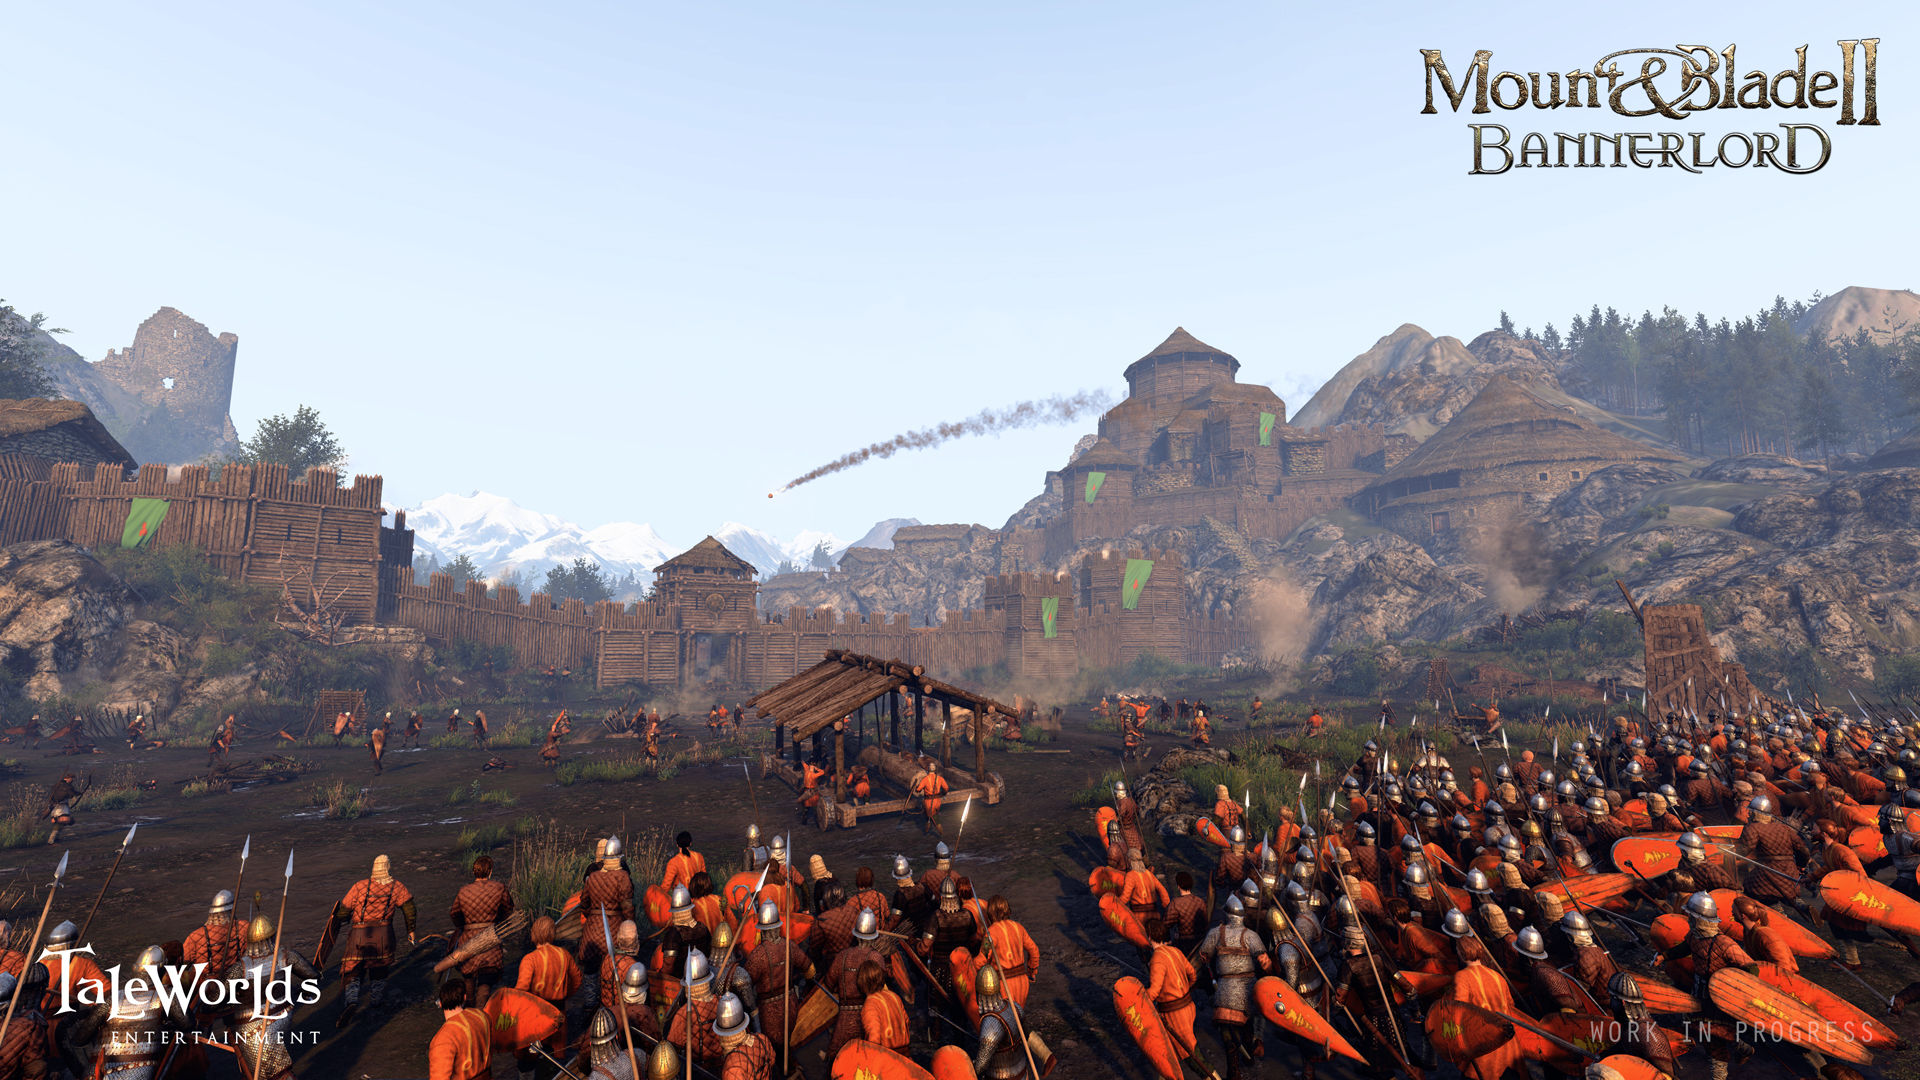 Video Game Mount & Blade II: Bannerlord HD Wallpaper | Background Image